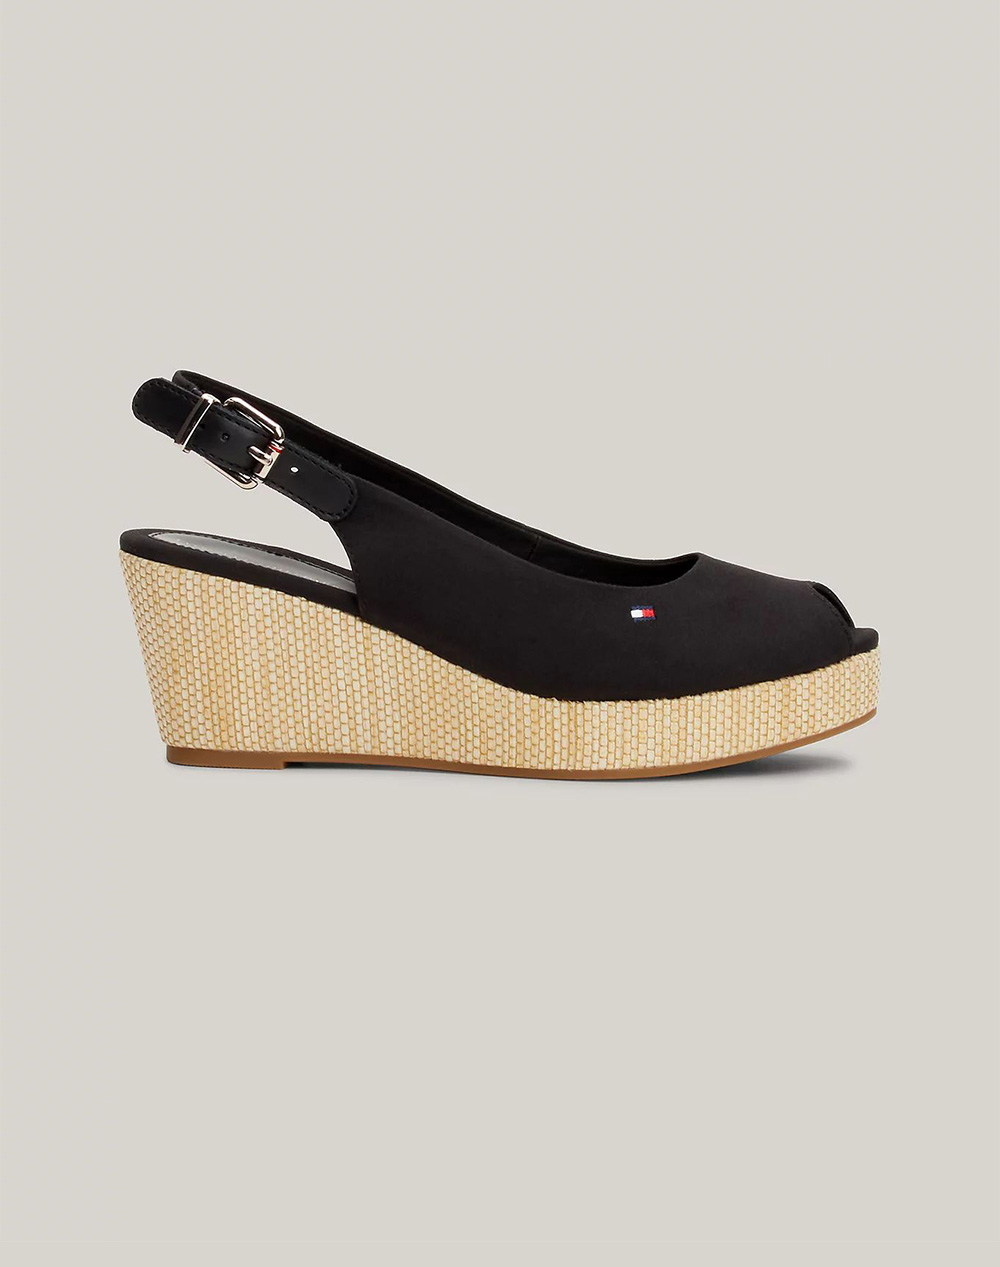 TOMMY HILFIGER ICONIC ELBA SLING BACK WEDGE FW0FW04788-BDS Black 3810ATOMM6410076_9371